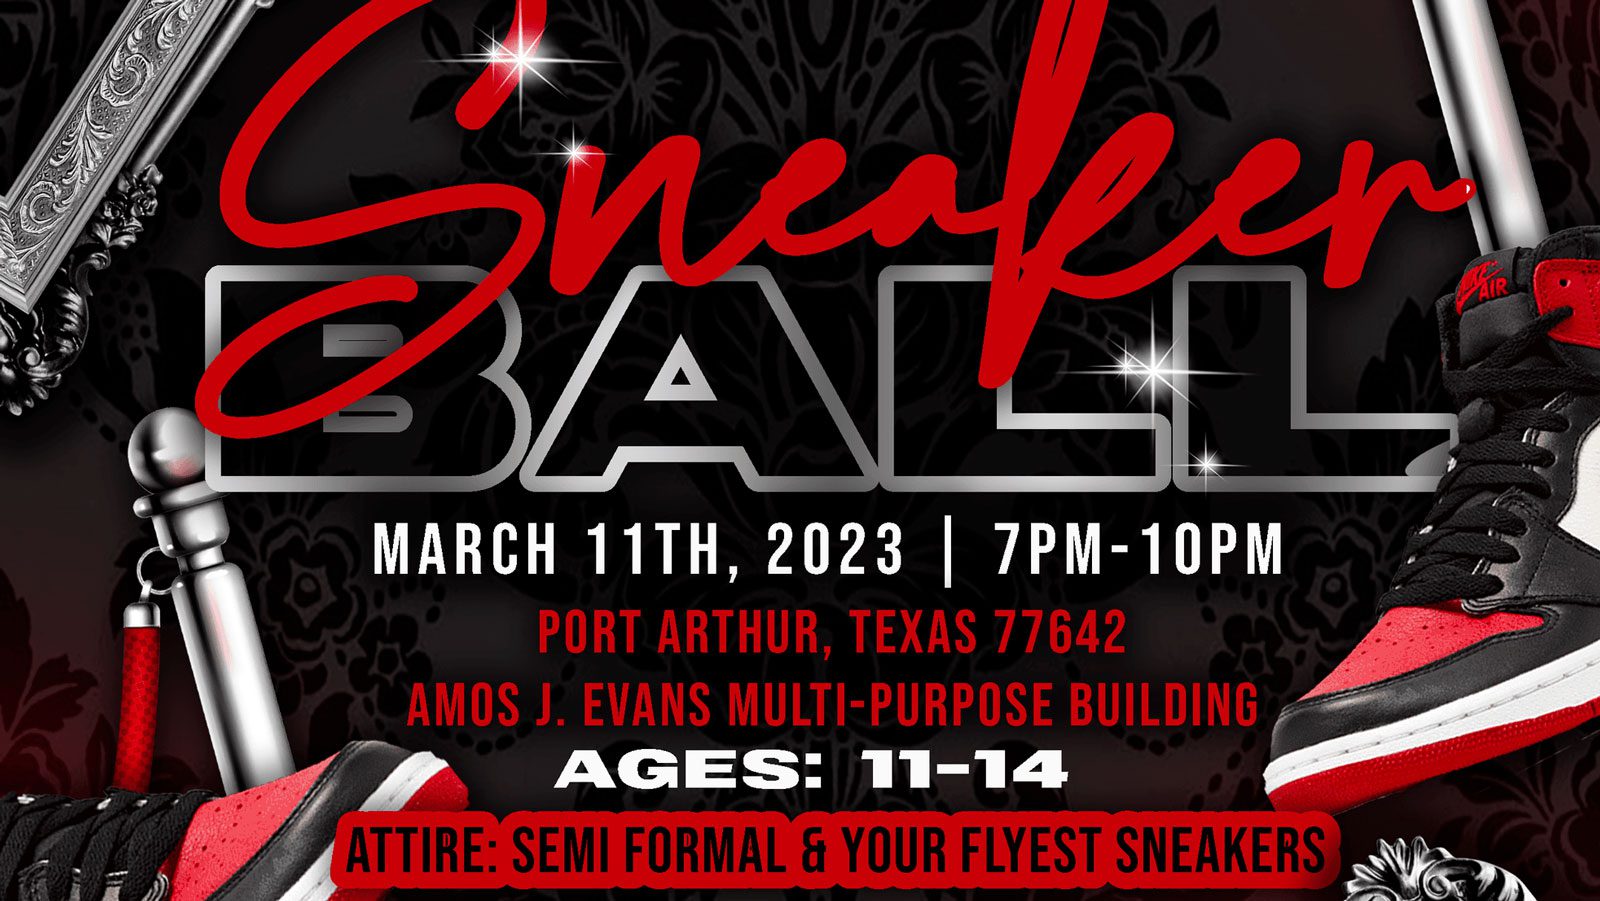 sneaker ball flyer for an event in port arther texas